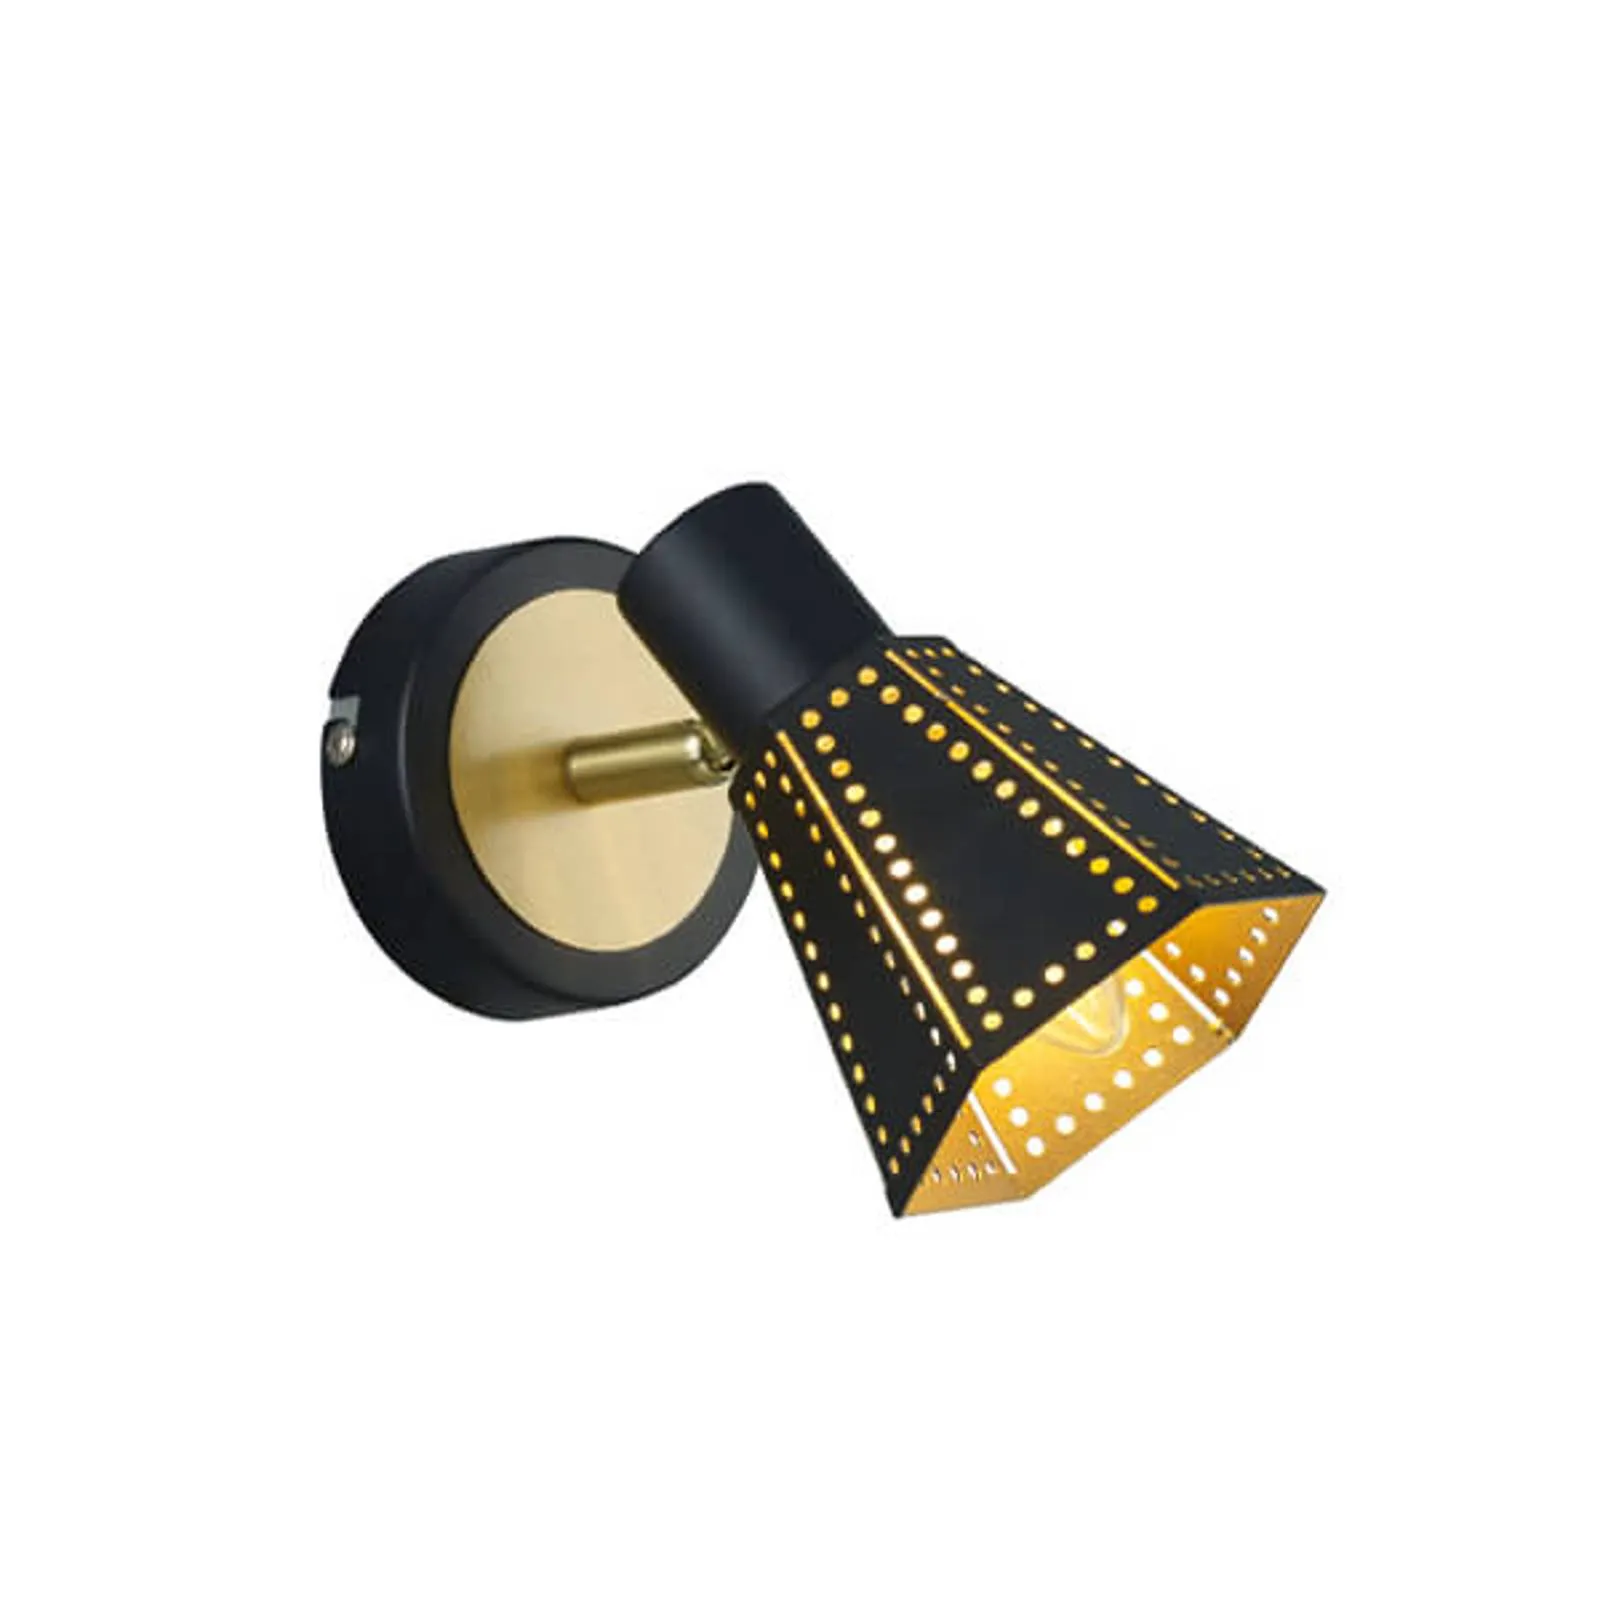 Special Houston wall spotlight, black and gold